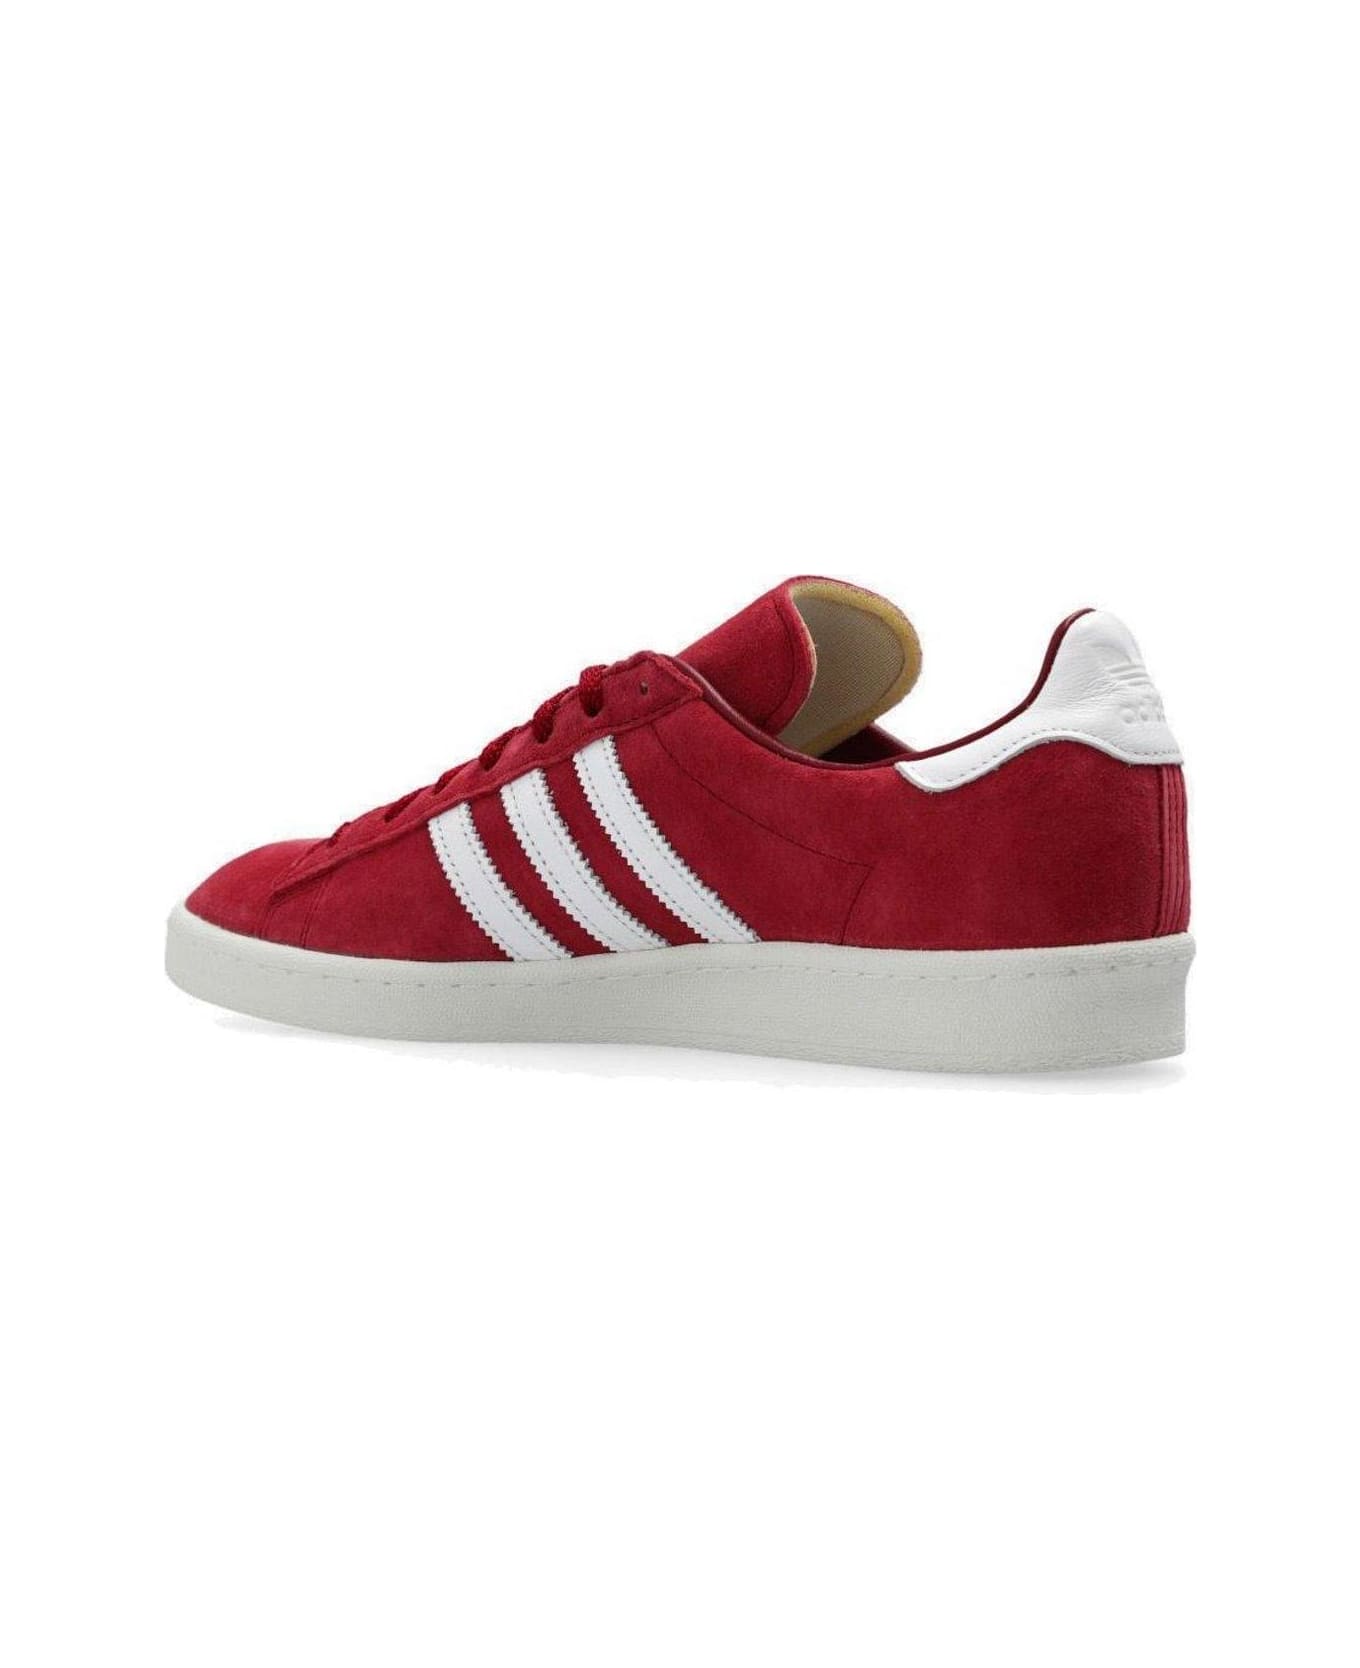 Adidas Campus 80s Lace-up Sneakers - BORDEAUX スニーカー